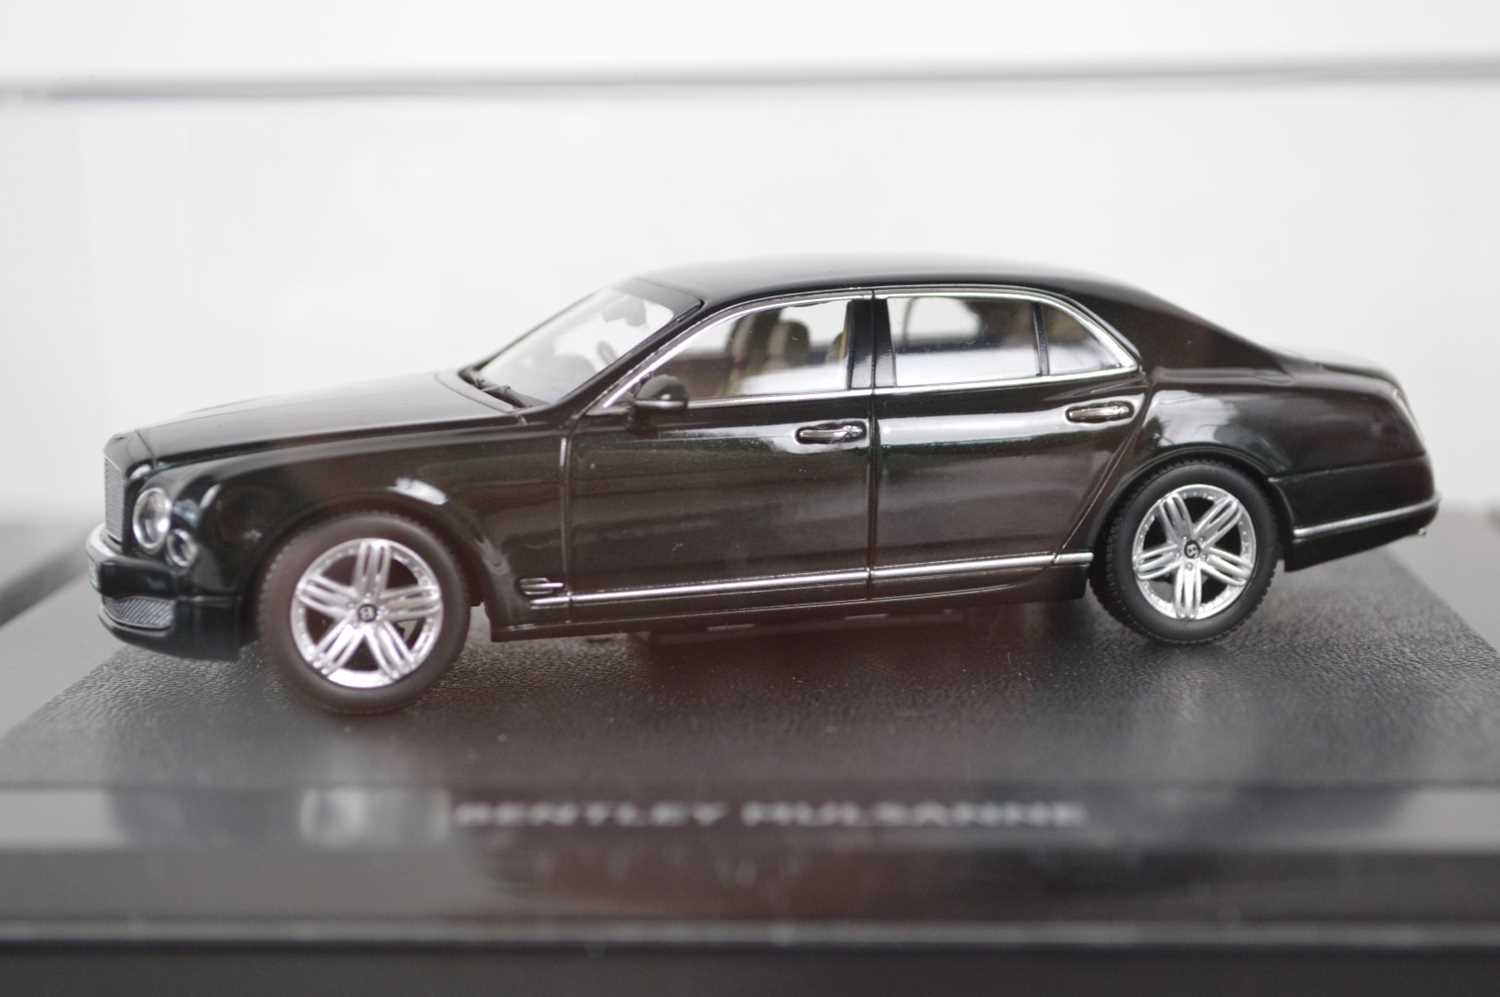 Four Minichamps 1:43 Scale Bentley Models - Image 3 of 5